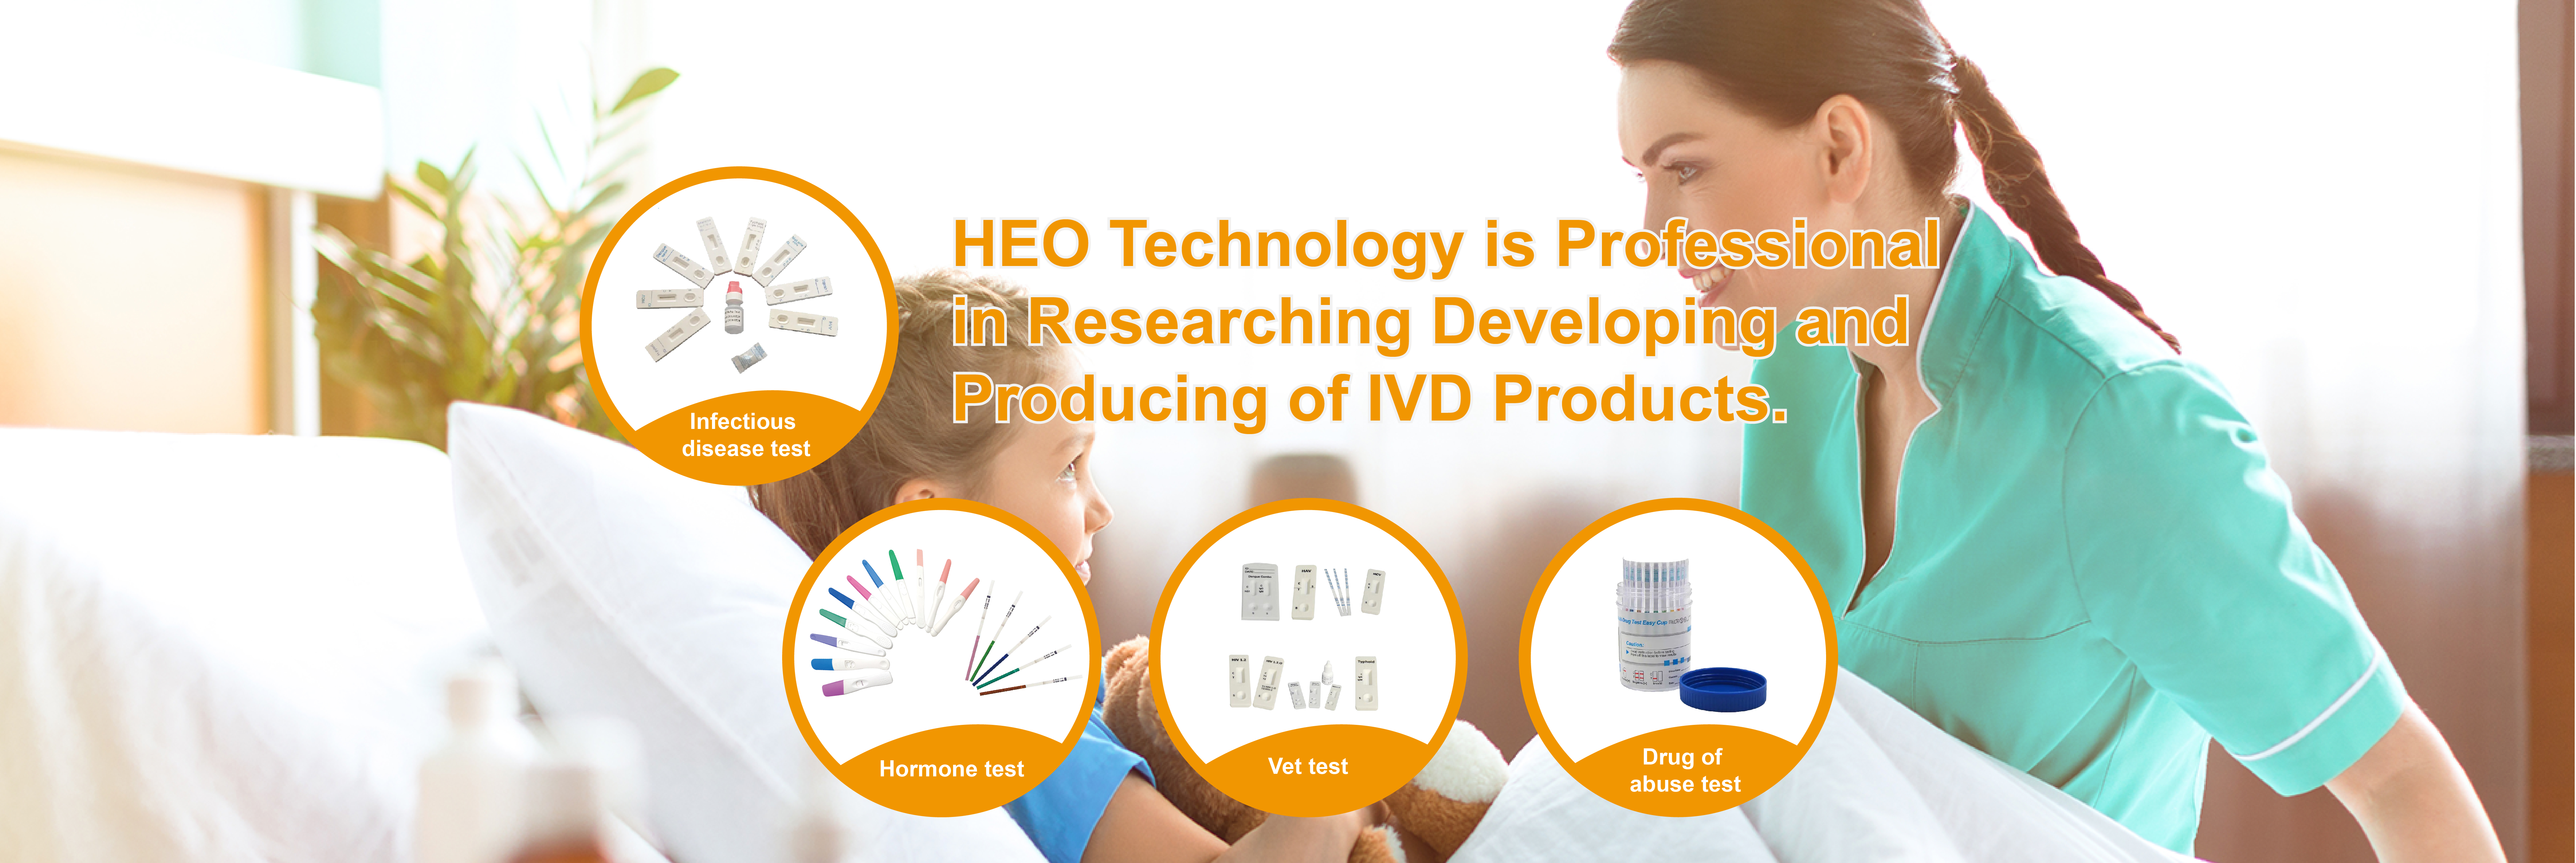 I-HEO TECHNOLOGY IVD PRODUCTS BANNER1